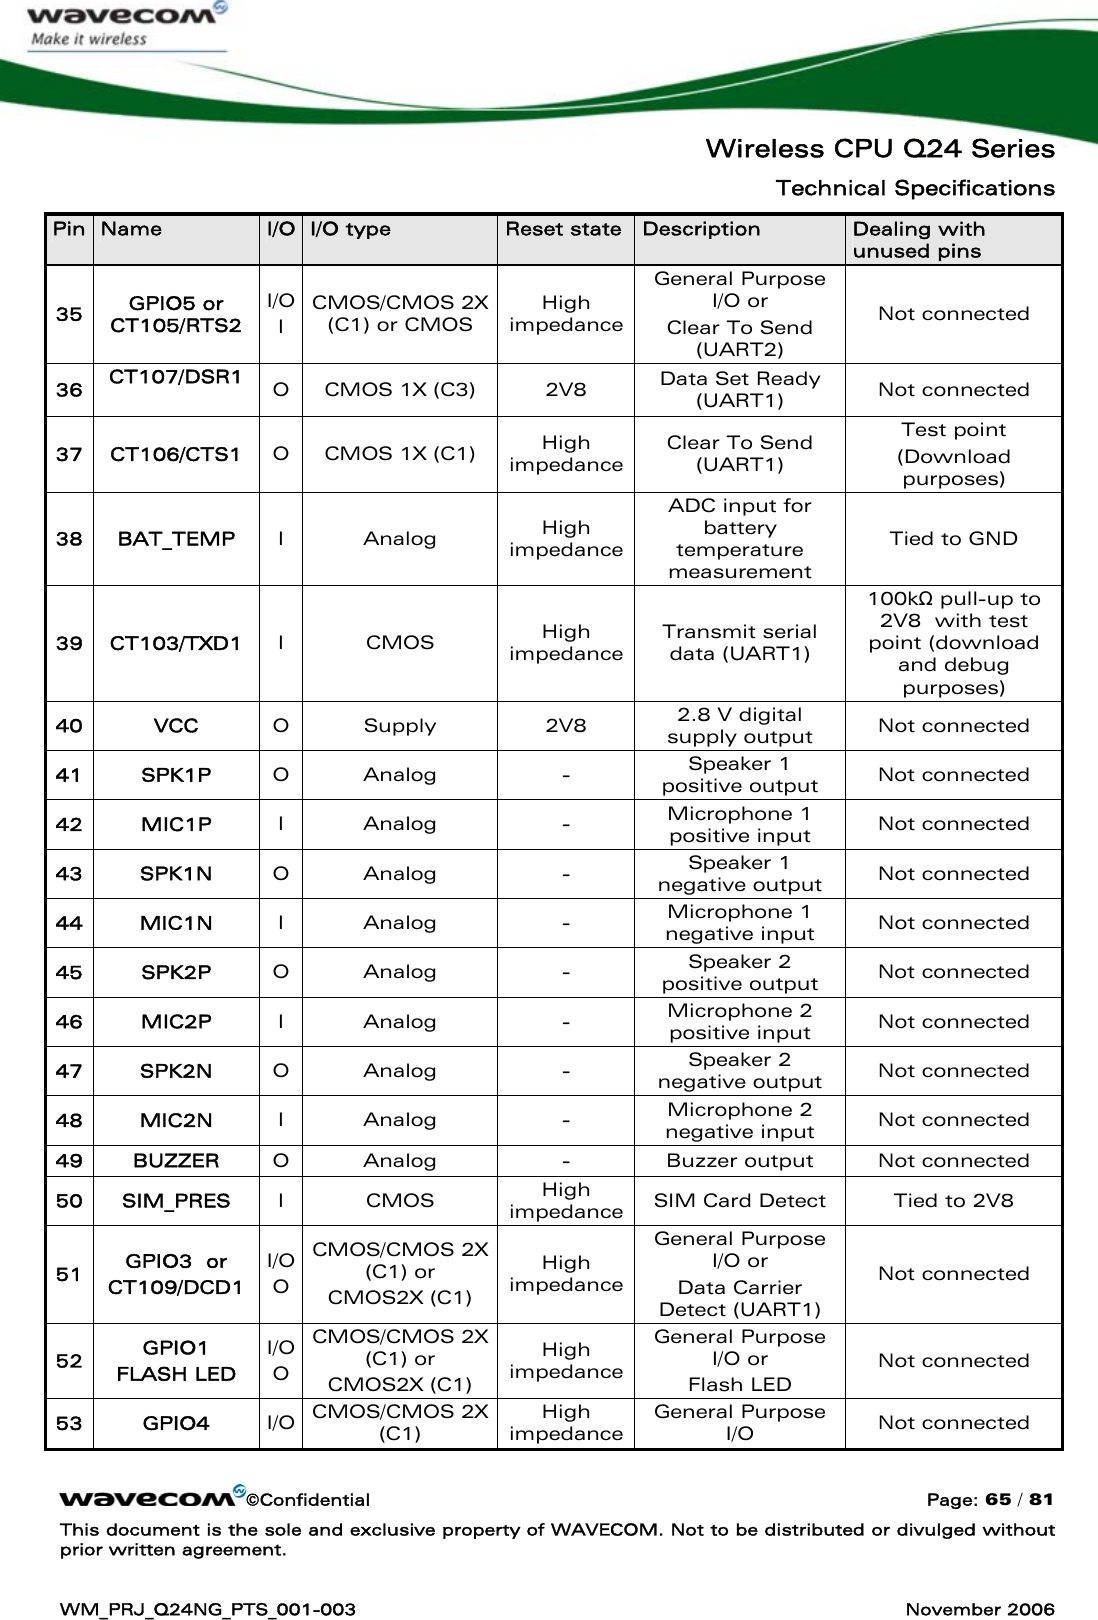   Wireless CPU Q24 Series Technical Specifications ©Confidential  Page: 65 / 81 This document is the sole and exclusive property of WAVECOM. Not to be distributed or divulged without prior written agreement.  WM_PRJ_Q24NG_PTS_001-003  November 2006  Pin  Name  I/O  I/O type  Reset state  Description  Dealing with unused pins 35  GPIO5 or  CT105/RTS2 I/O I CMOS/CMOS 2X (C1) or CMOS  High impedance General Purpose I/O or  Clear To Send (UART2) Not connected 36  CT107/DSR1  O  CMOS 1X (C3)  2V8  Data Set Ready  (UART1)  Not connected 37 CT106/CTS1  O  CMOS 1X (C1)  High impedance Clear To Send (UART1) Test point (Download purposes) 38 BAT_TEMP  I Analog  High impedance ADC input for battery temperature measurement Tied to GND 39 CT103/TXD1  I CMOS  High impedance Transmit serial data (UART1) 100kΩ pull-up to 2V8  with test point (download and debug purposes) 40 VCC  O Supply  2V8  2.8 V digital supply output  Not connected 41 SPK1P  O Analog  -  Speaker 1 positive output  Not connected 42 MIC1P  I Analog  -  Microphone 1 positive input  Not connected 43 SPK1N  O Analog  -  Speaker 1 negative output  Not connected 44 MIC1N  I Analog  -  Microphone 1 negative input  Not connected 45 SPK2P  O Analog  -  Speaker 2 positive output  Not connected 46 MIC2P  I Analog  -  Microphone 2 positive input  Not connected 47 SPK2N  O Analog  -  Speaker 2 negative output  Not connected 48 MIC2N  I Analog  -  Microphone 2 negative input  Not connected 49 BUZZER  O  Analog  -  Buzzer output  Not connected 50 SIM_PRES  I CMOS  High impedance SIM Card Detect  Tied to 2V8 51  GPIO3  or CT109/DCD1 I/O O CMOS/CMOS 2X (C1) or CMOS2X (C1) High impedance General Purpose I/O or  Data Carrier Detect (UART1) Not connected 52  GPIO1 FLASH LED I/O O CMOS/CMOS 2X (C1) or CMOS2X (C1) High impedance General Purpose I/O or  Flash LED Not connected 53 GPIO4 I/O  CMOS/CMOS 2X (C1) High impedance General Purpose I/O  Not connected 